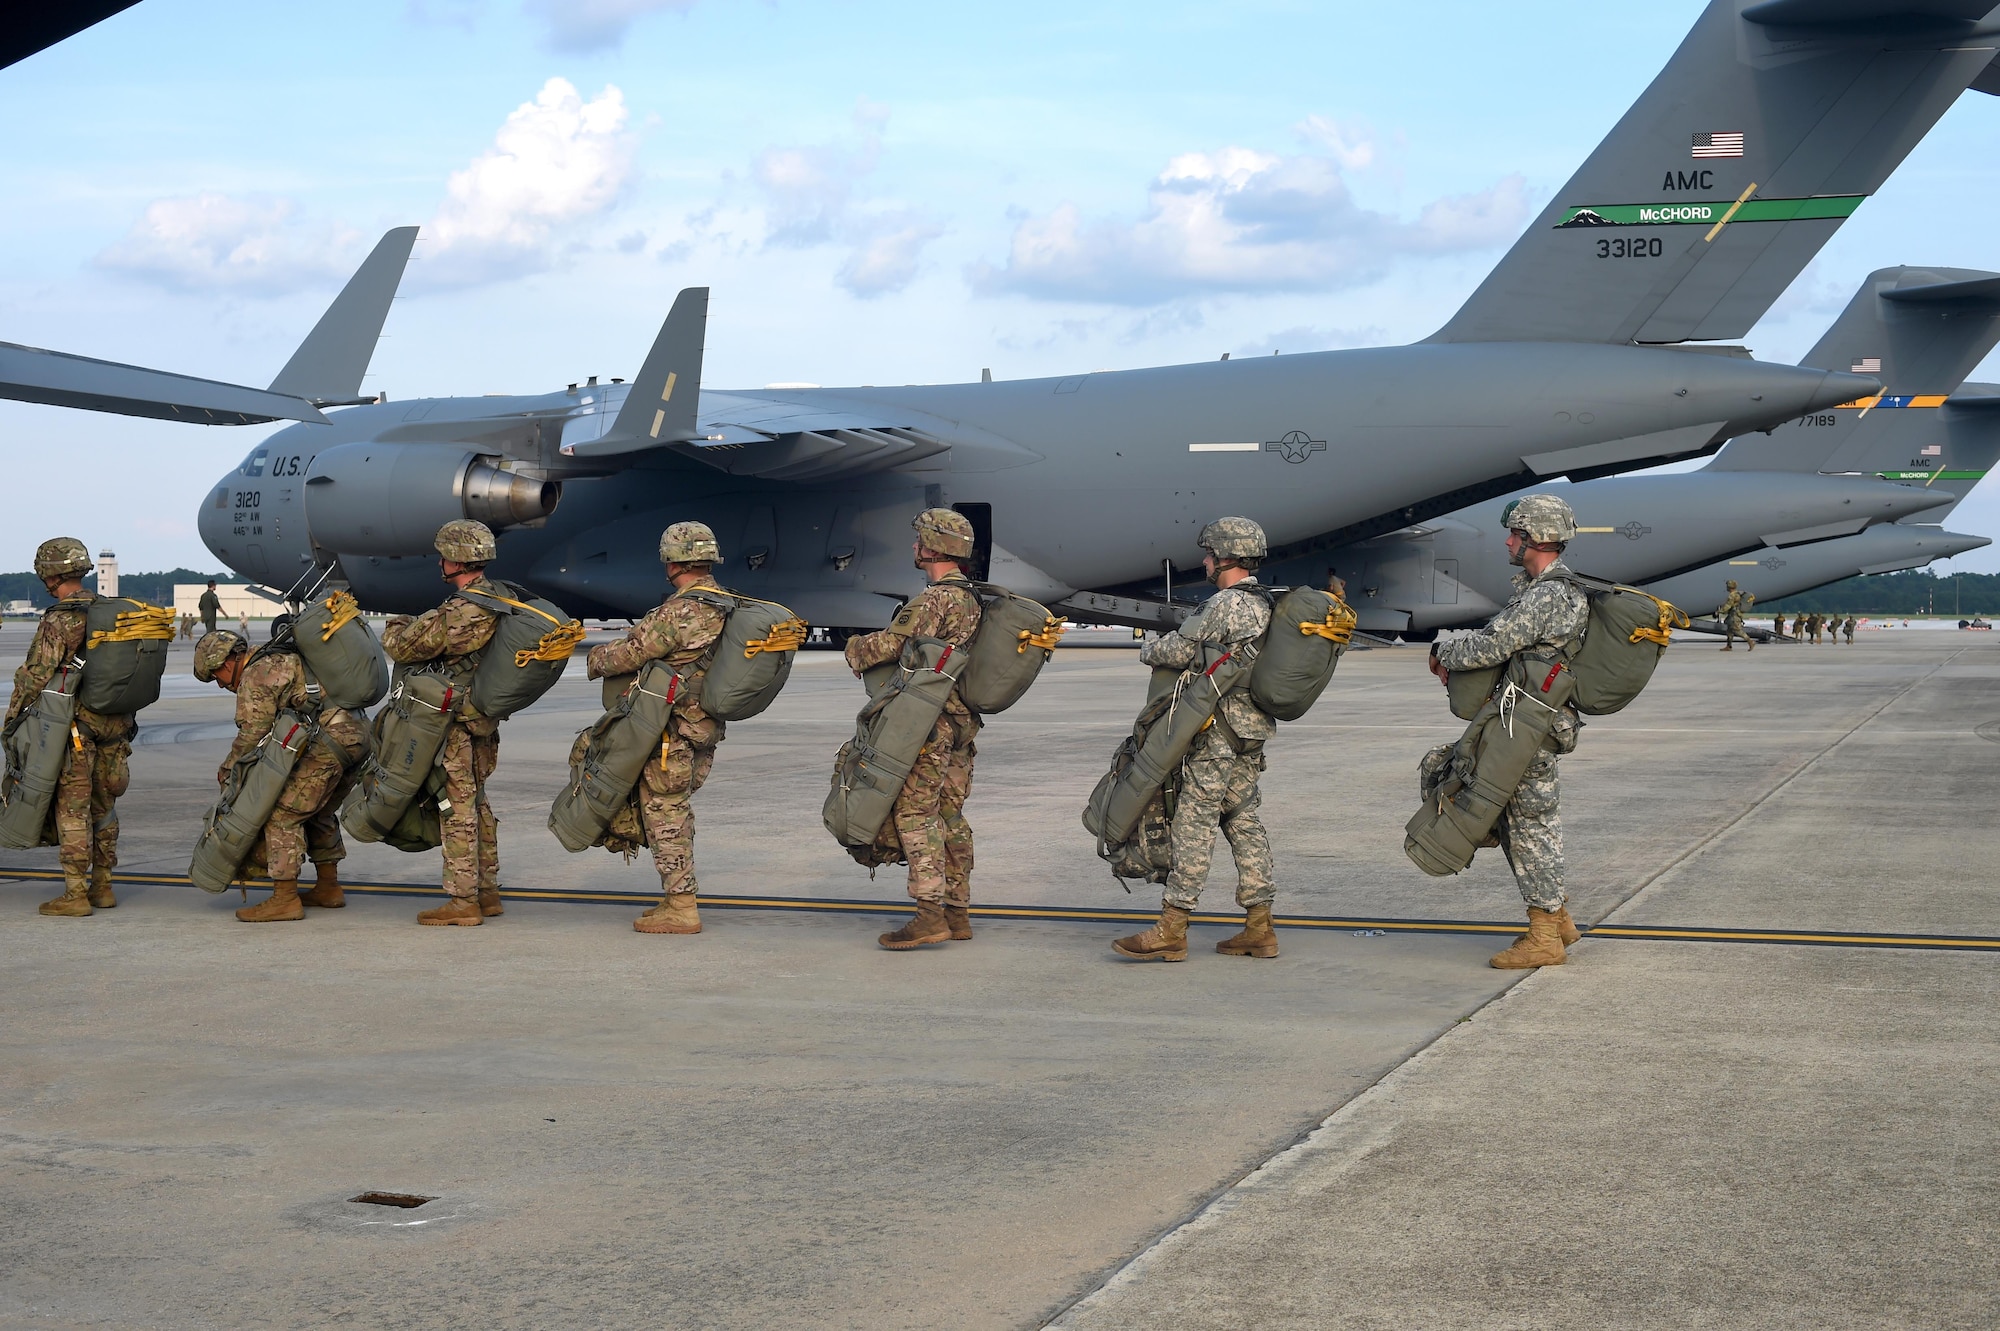 82nd Airborne Division Soldiers load into a 62nd Airlift Wing C-17 Globemaster III prior to a static line jump at Pope Army Air Field, North Carolina, June 4, 2016. Three McChord C-17’s met up with four Joint Base Charleston, South Carolina, C-17’s to conduct the personnel air drop for training prior to departing for Europe to participate in a multi-national exercise, known as Swift Response (U.S. Air Force photo/Staff Sgt. Naomi Shipley)